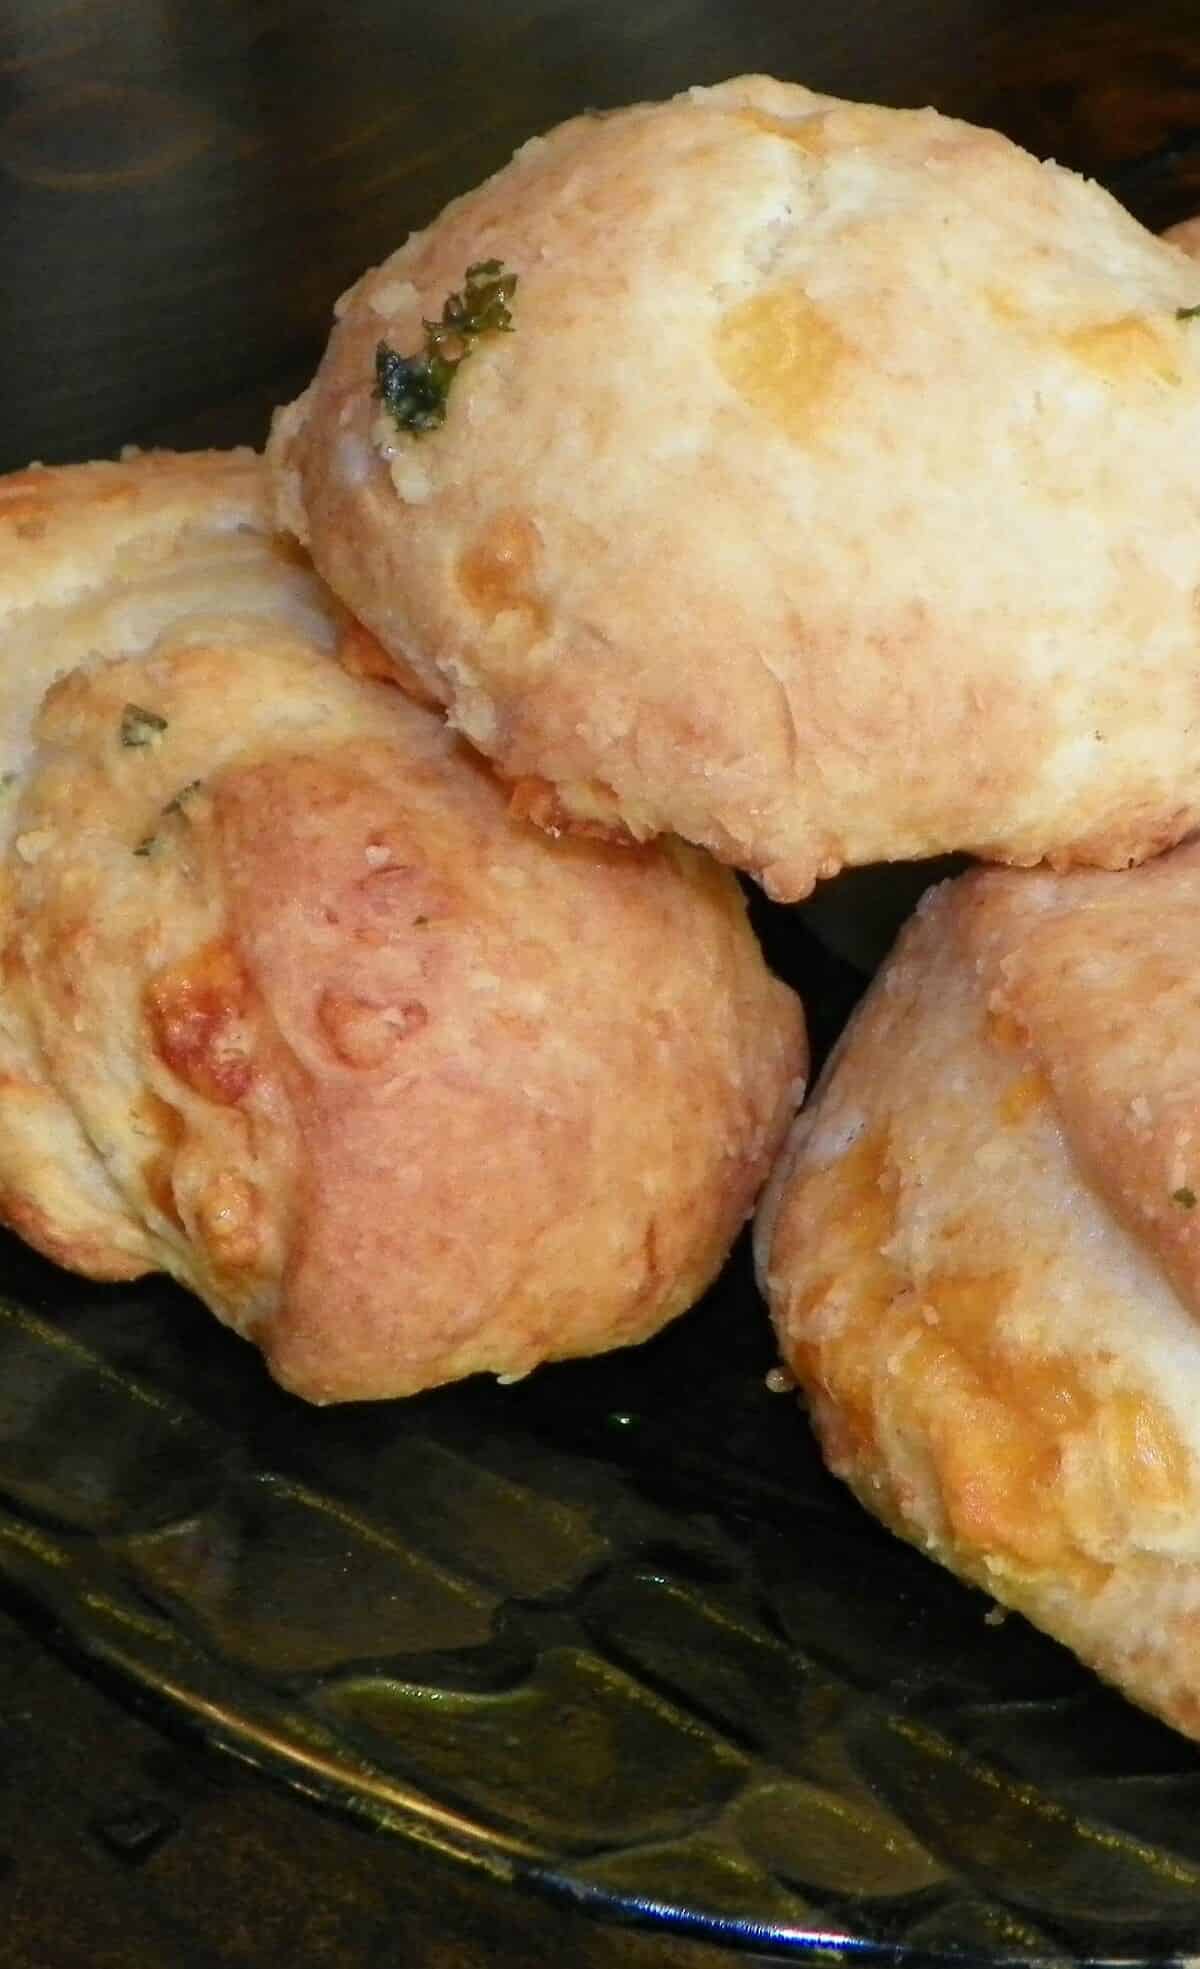  Flaky layers of biscuit dough flecked with savory herbs and bursting with gooey cheddar cheese.